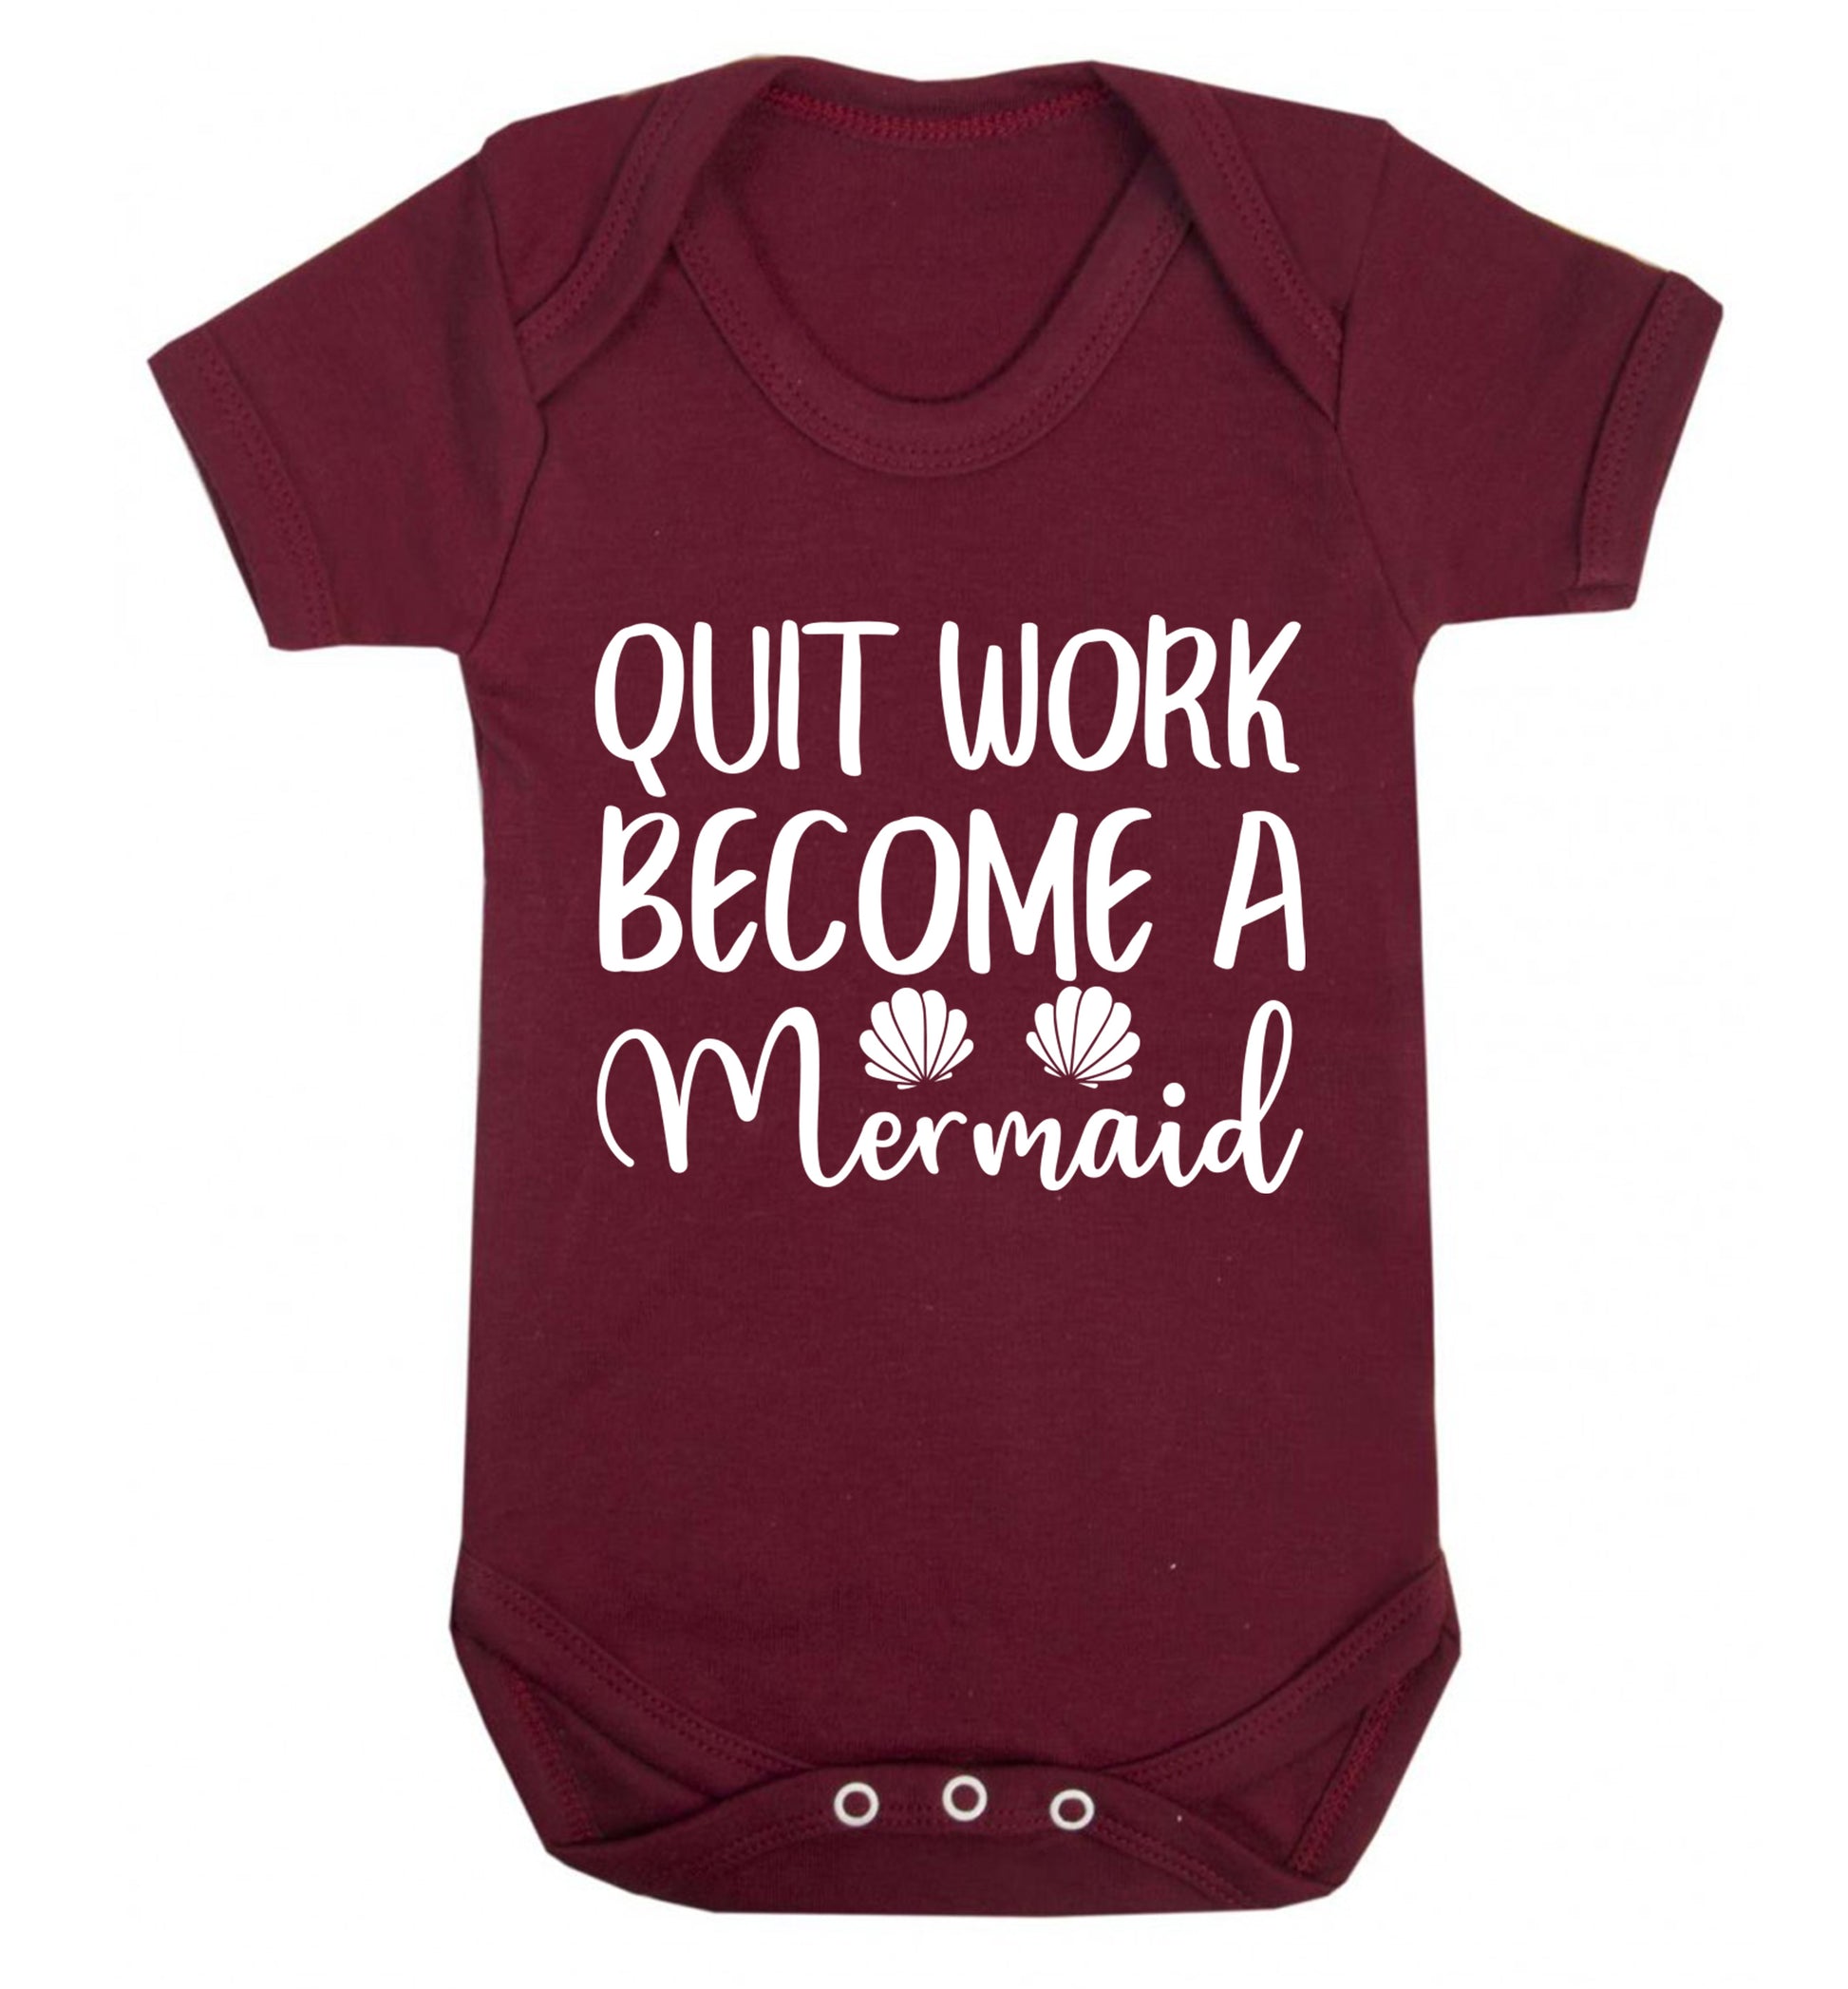 Quit work become a mermaid Baby Vest maroon 18-24 months